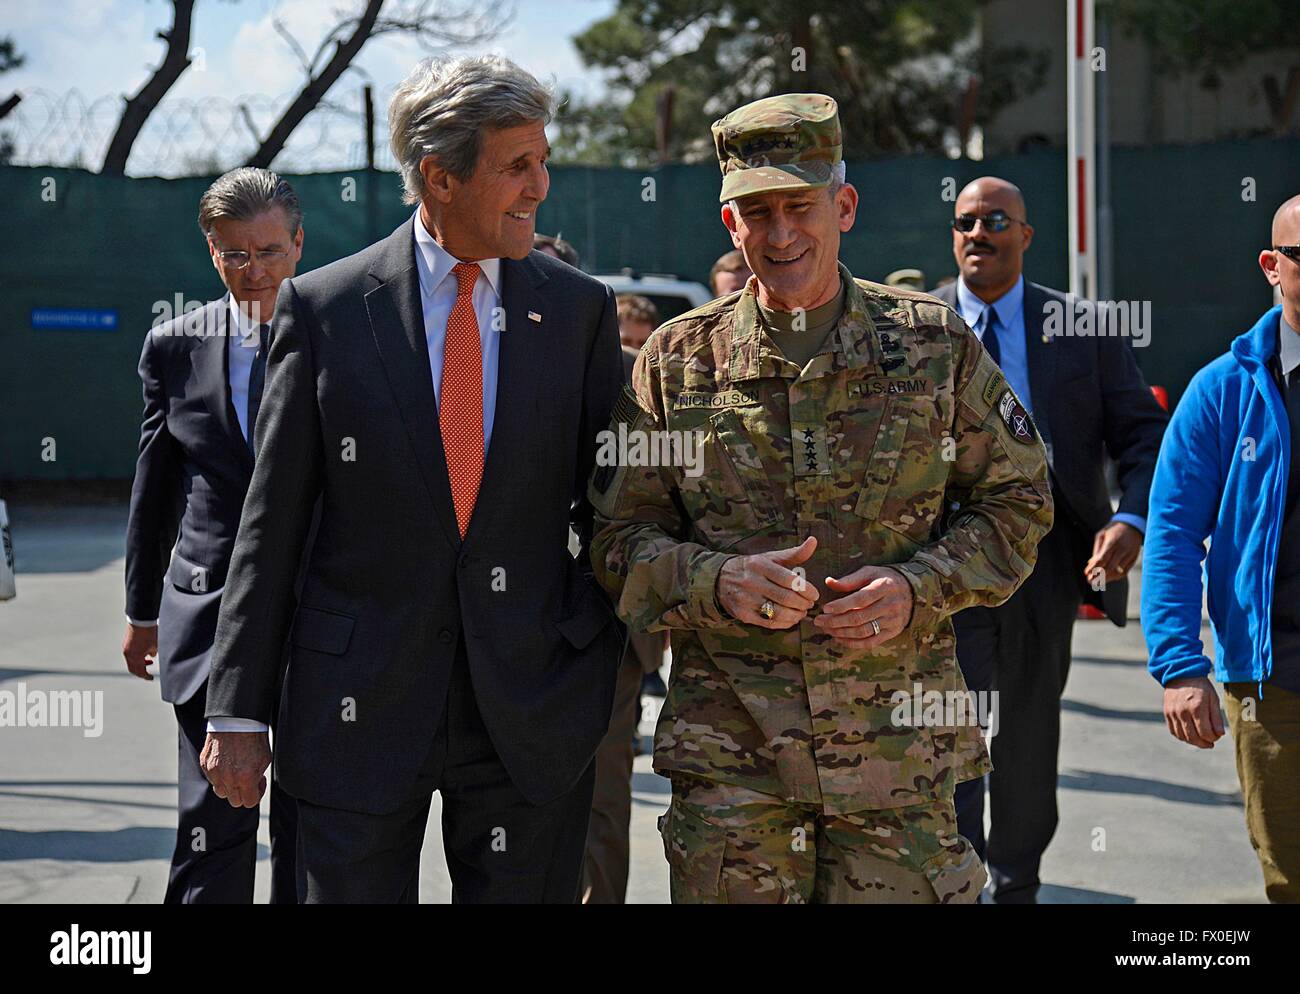 Kabul, Afghanistan. 9th April, 2016. U.S Secretary of State John Kerry walks with Gen. John Nicholson, Commander of the U.S. Forces in Afghanistan, at Camp Resolute Support April 9, 2016 in Kabul, Afghanistan. Kerry made a surprise visit to Kabul to meet with government leaders and U.S. Armed Forces commanders. Credit:  Planetpix/Alamy Live News Stock Photo